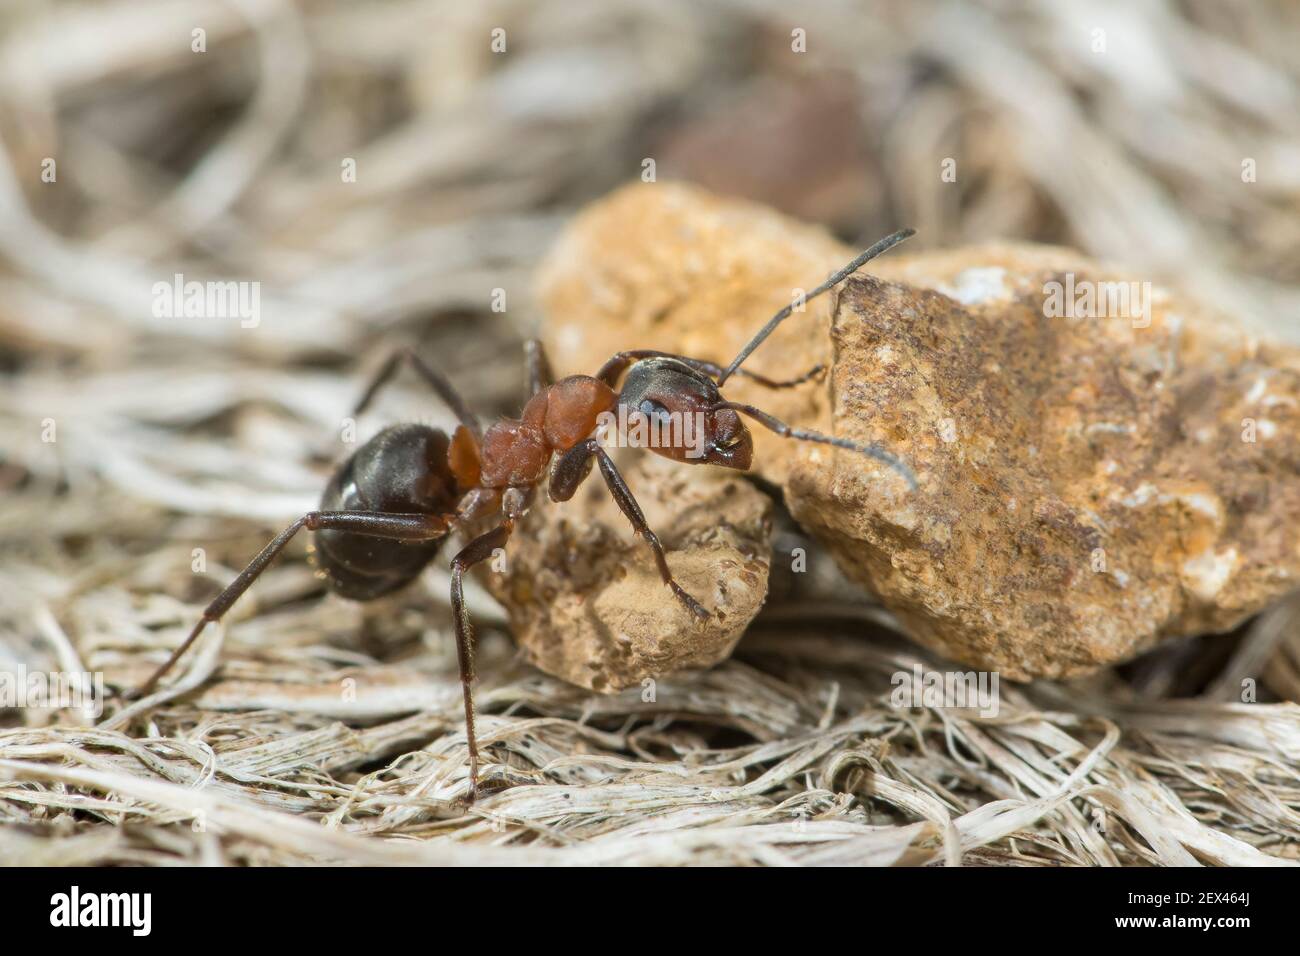 European Red Wood Ant (Formica polyctena) with pebble stone, Lorraine, France Stock Photo